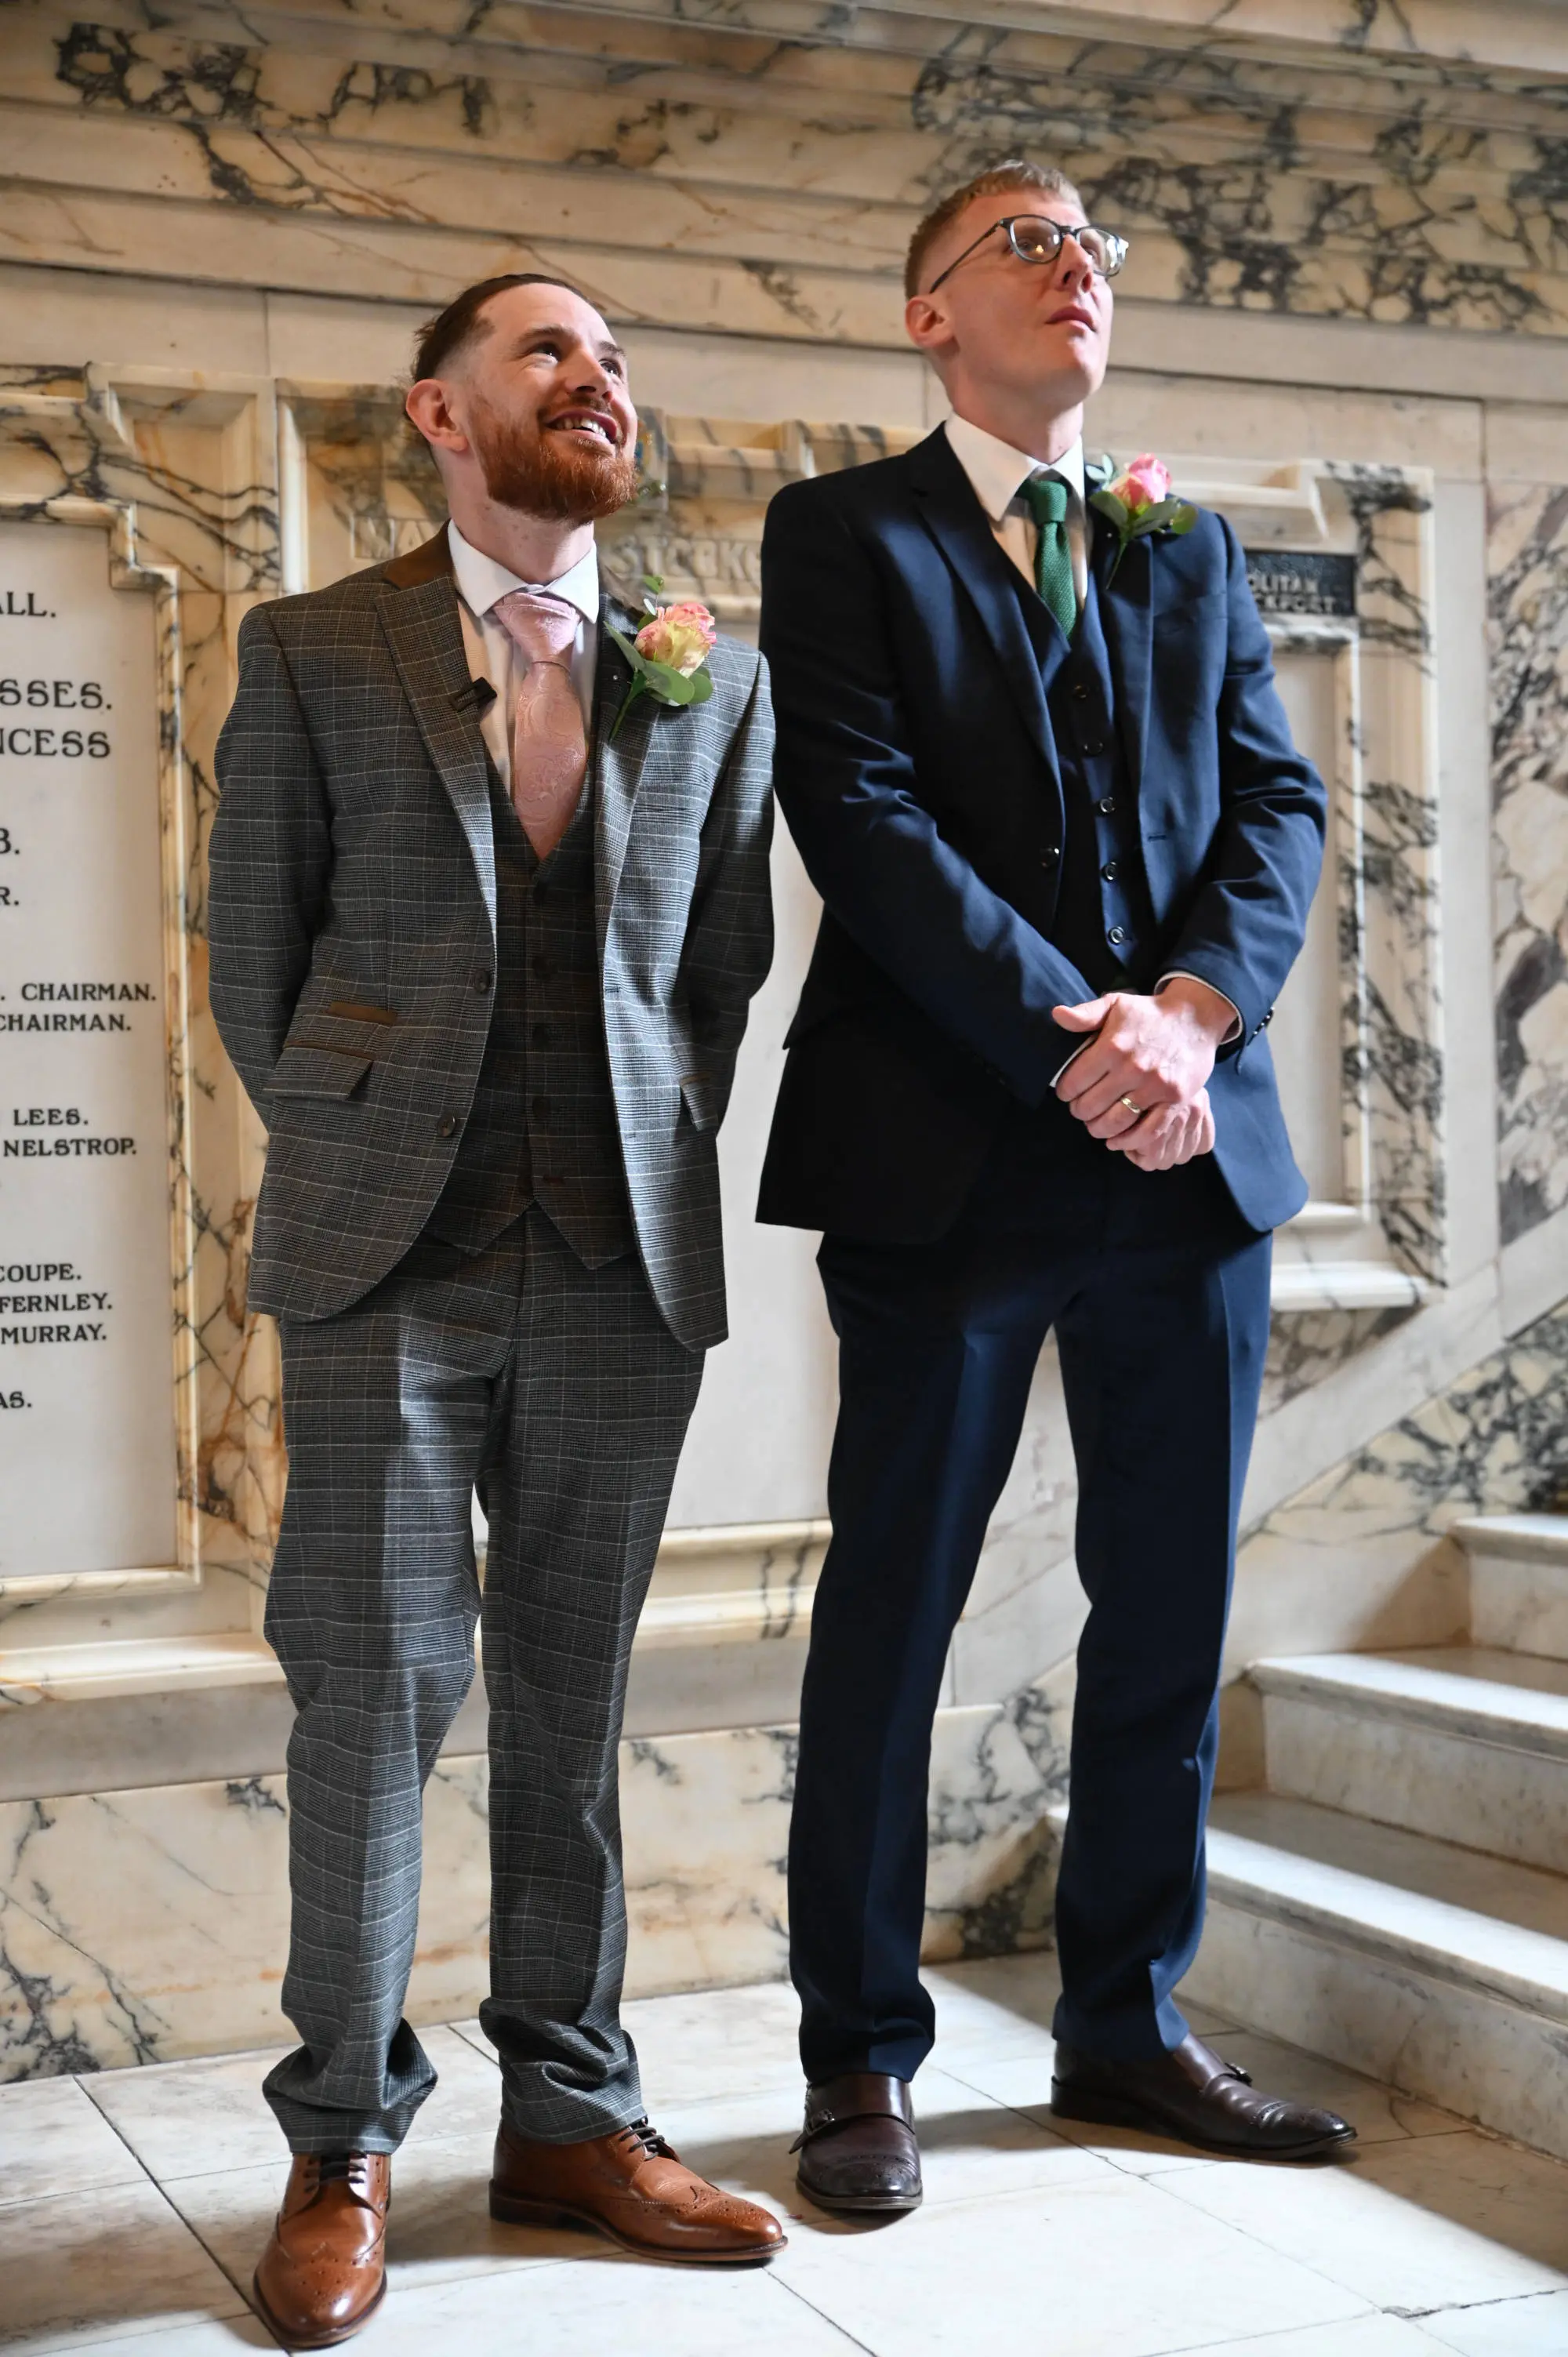 groom and his bestman seeing the bride for the first time r the first time